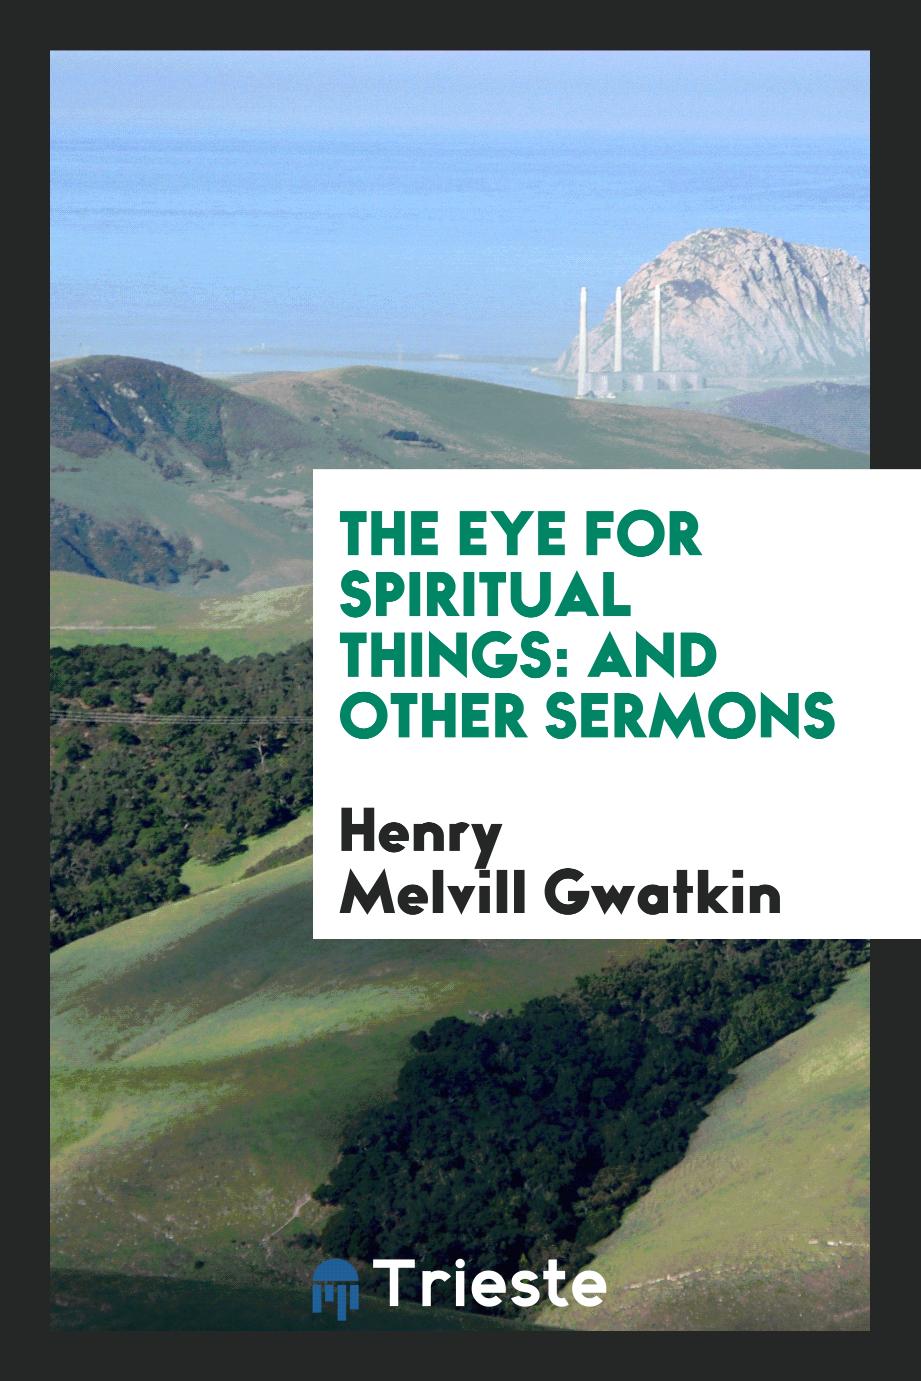 The Eye for Spiritual Things: And Other Sermons